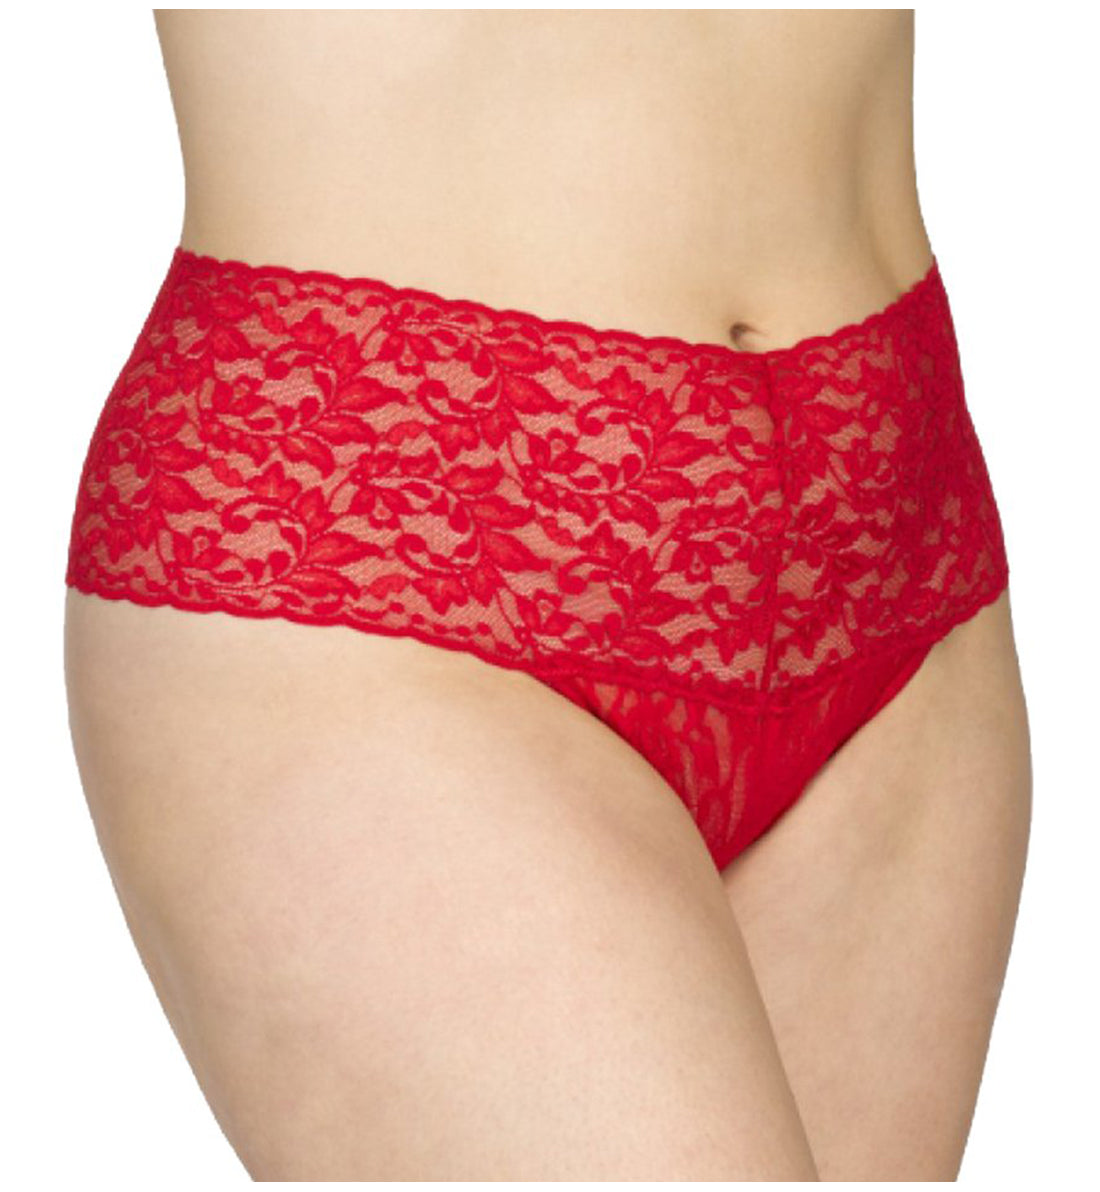 Hanky Panky Signature Lace PLUS Retro Thong (9K1926X),Red - Red,Plus Size